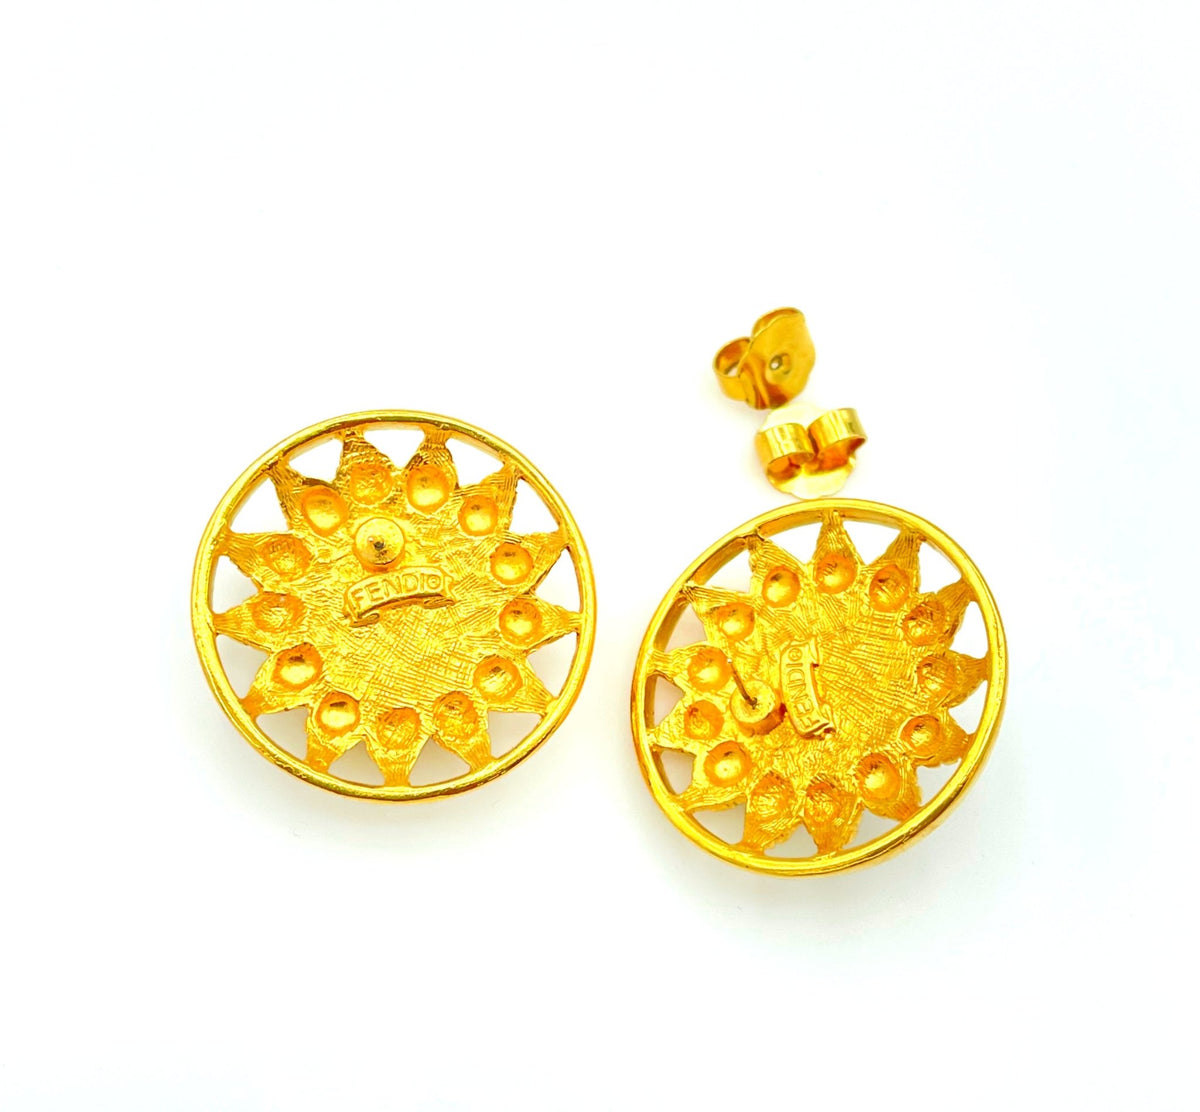 Fendi Gold Black Cabochon Round Sun Vintage Pierced Earrings - 24 Wishes Vintage Jewelry